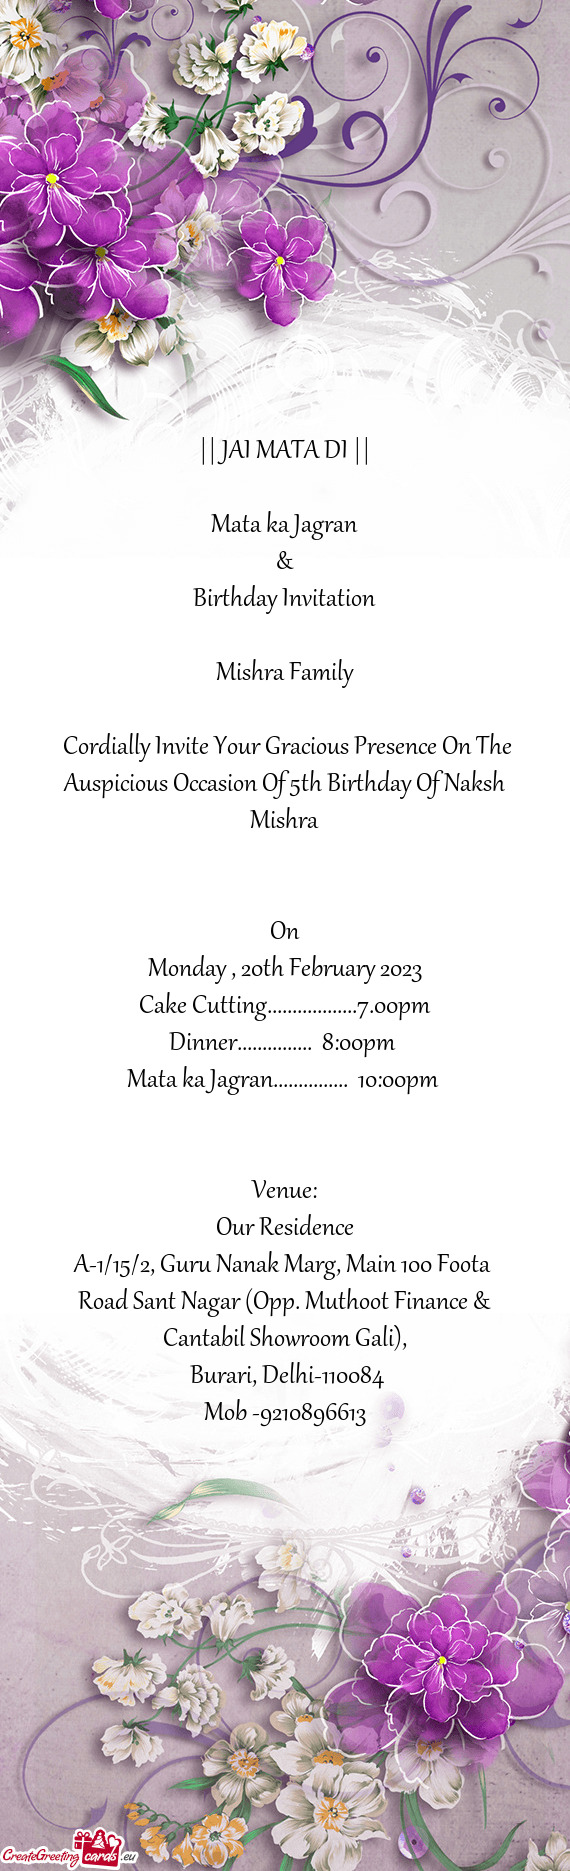 Cordially Invite Your Gracious Presence On The Auspicious Occasion Of 5th Birthday Of Naksh Mishra